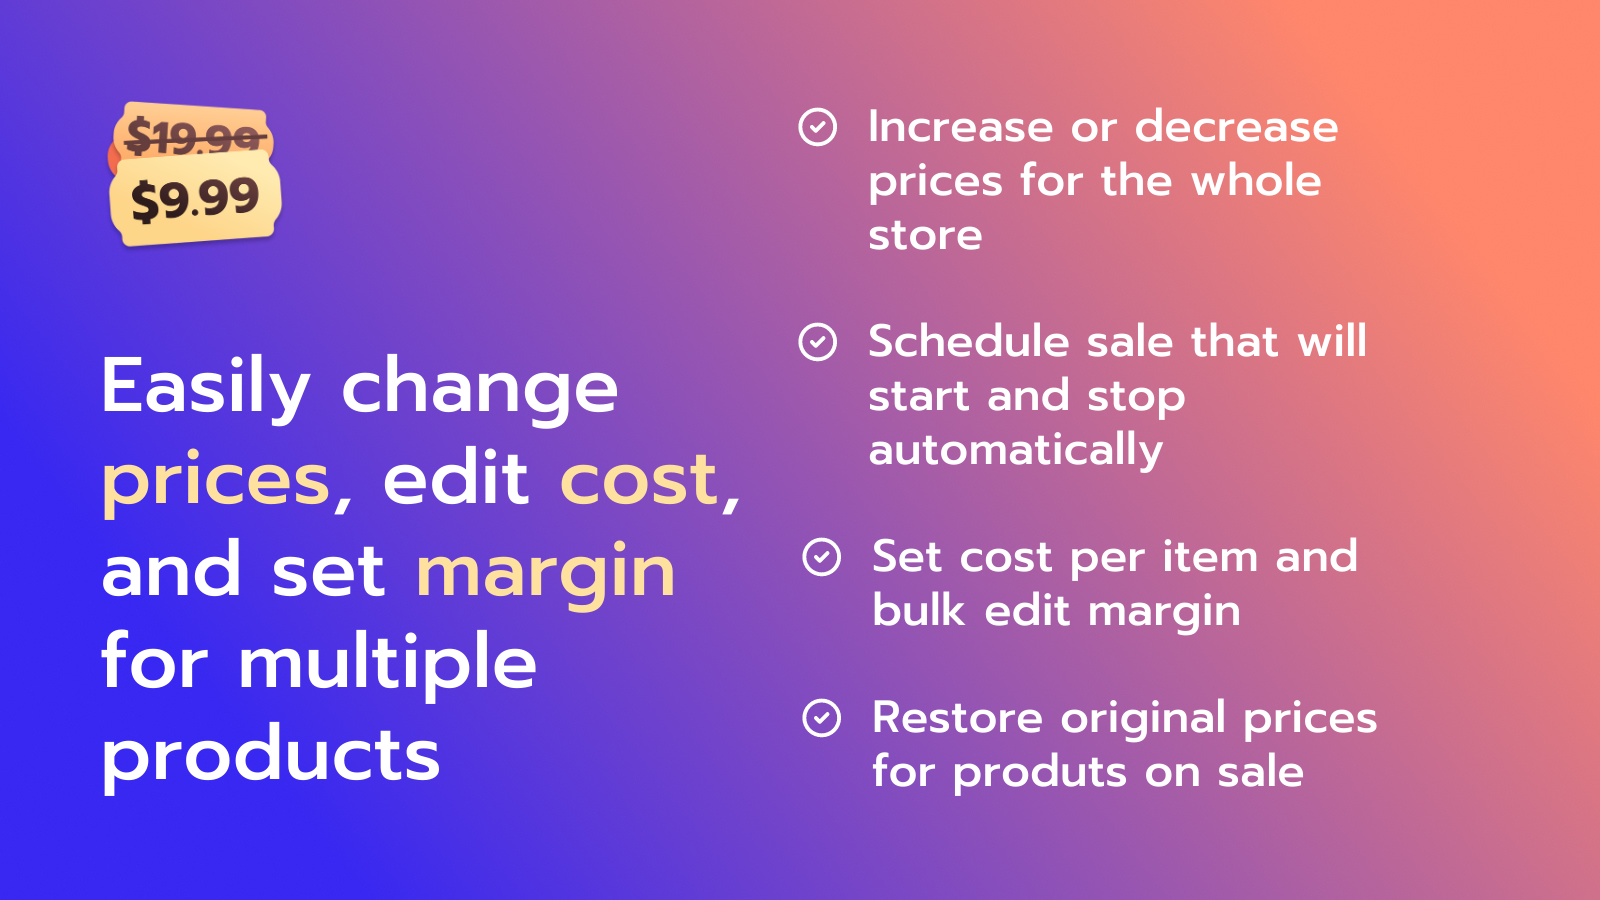 Easily change prices, edit cost, and set margin